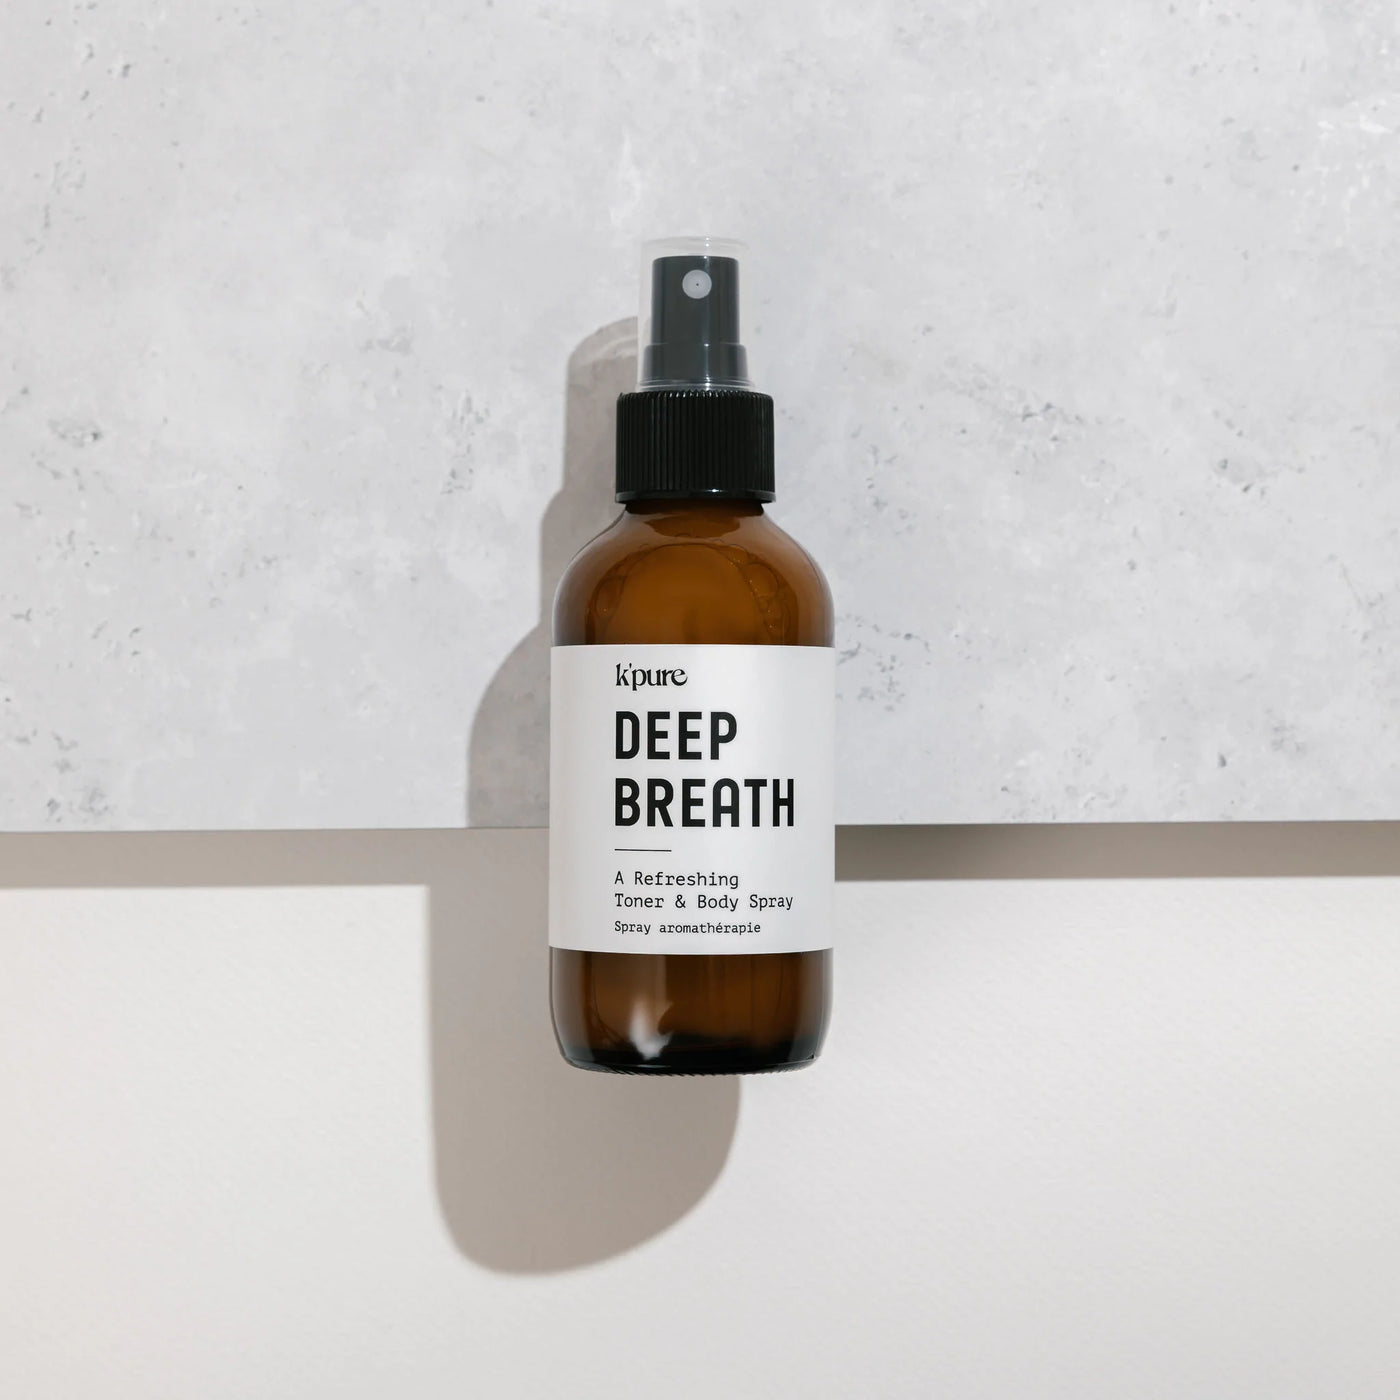 Deep Breath contains a blend of organic essential oils, including eucalyptus, lime and peppermint.   Great for cold and flu season, stressful situations or any time a breath of fresh air is all you need.  With the addition of witch hazel and coconut oil, you can use Deep Breath as a hydrating facial toner and a soothing room and body spray.  